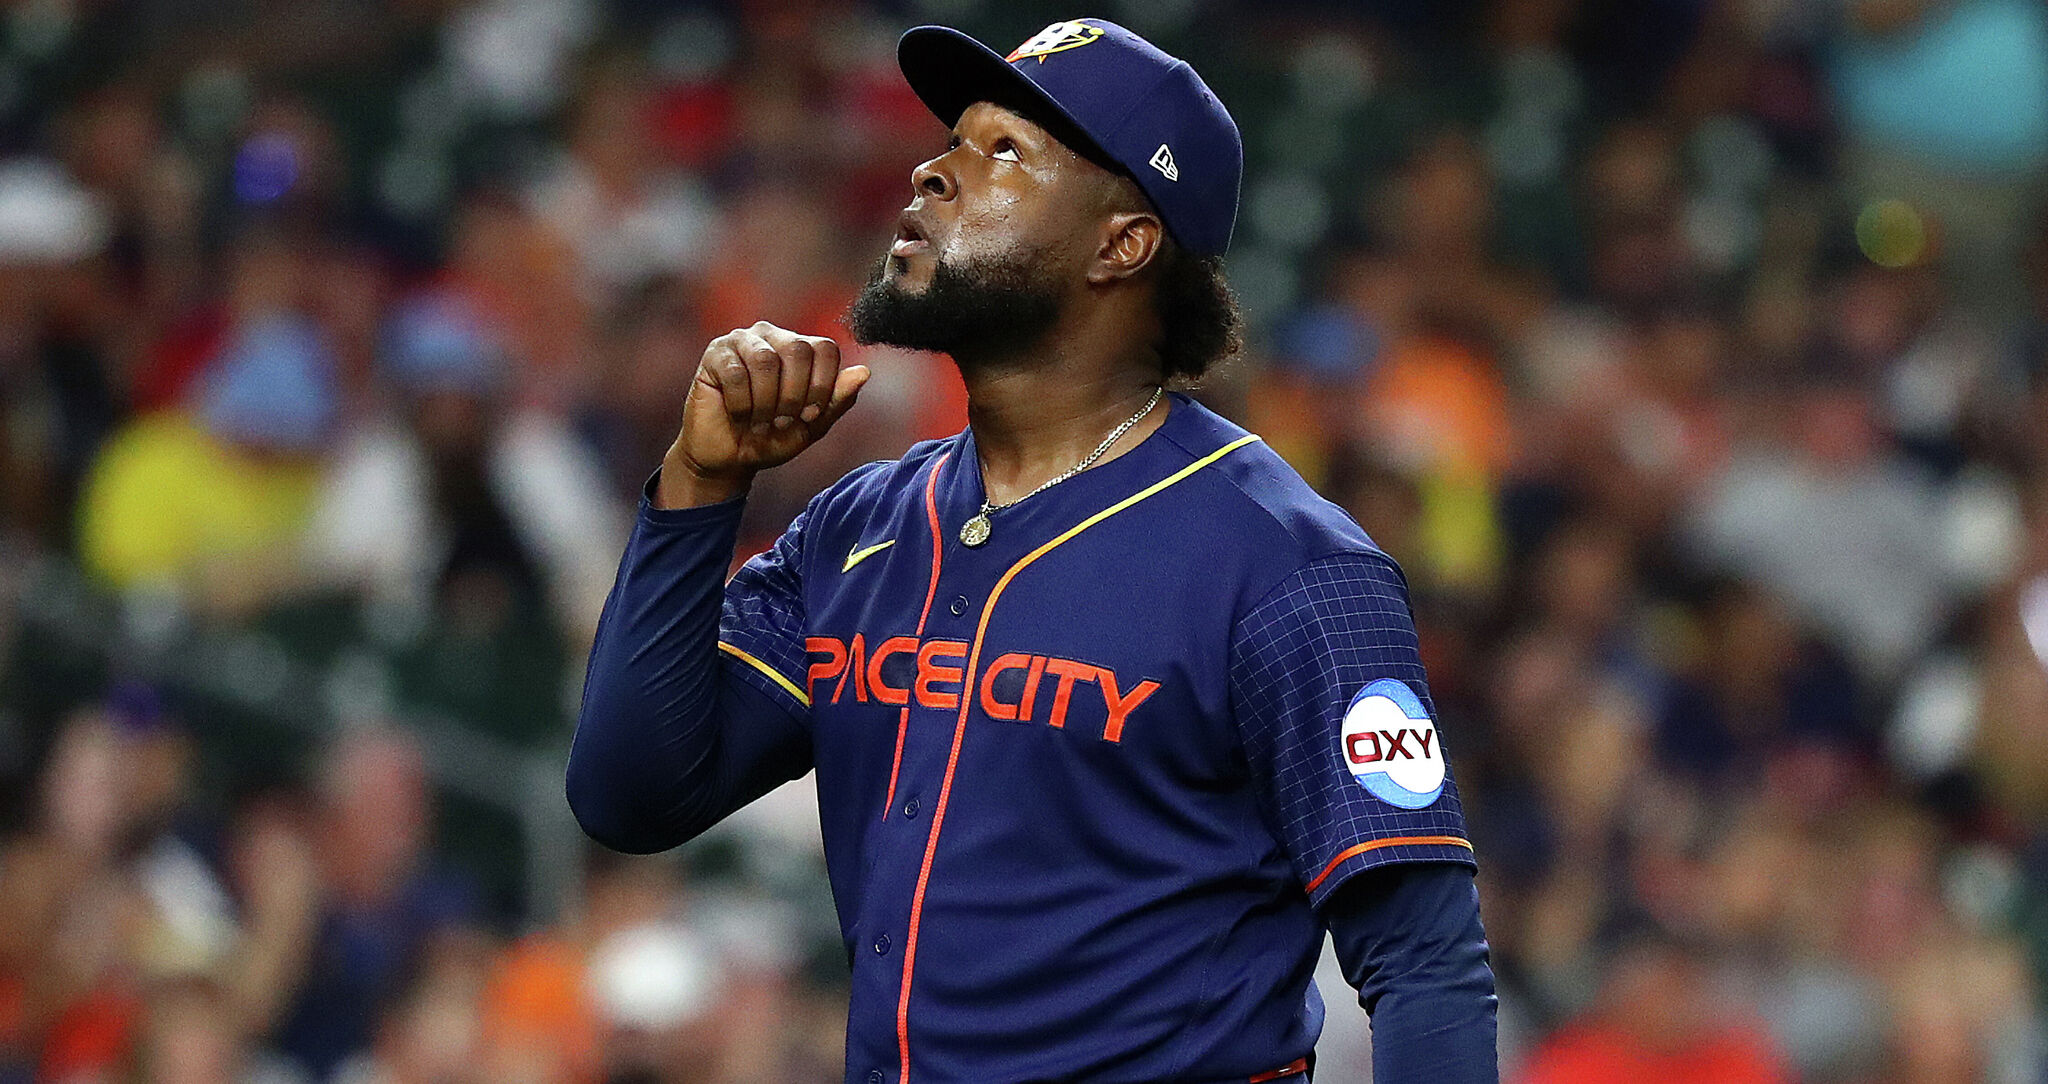 Cristian Javier continues to dominate on the mound as Astros beat